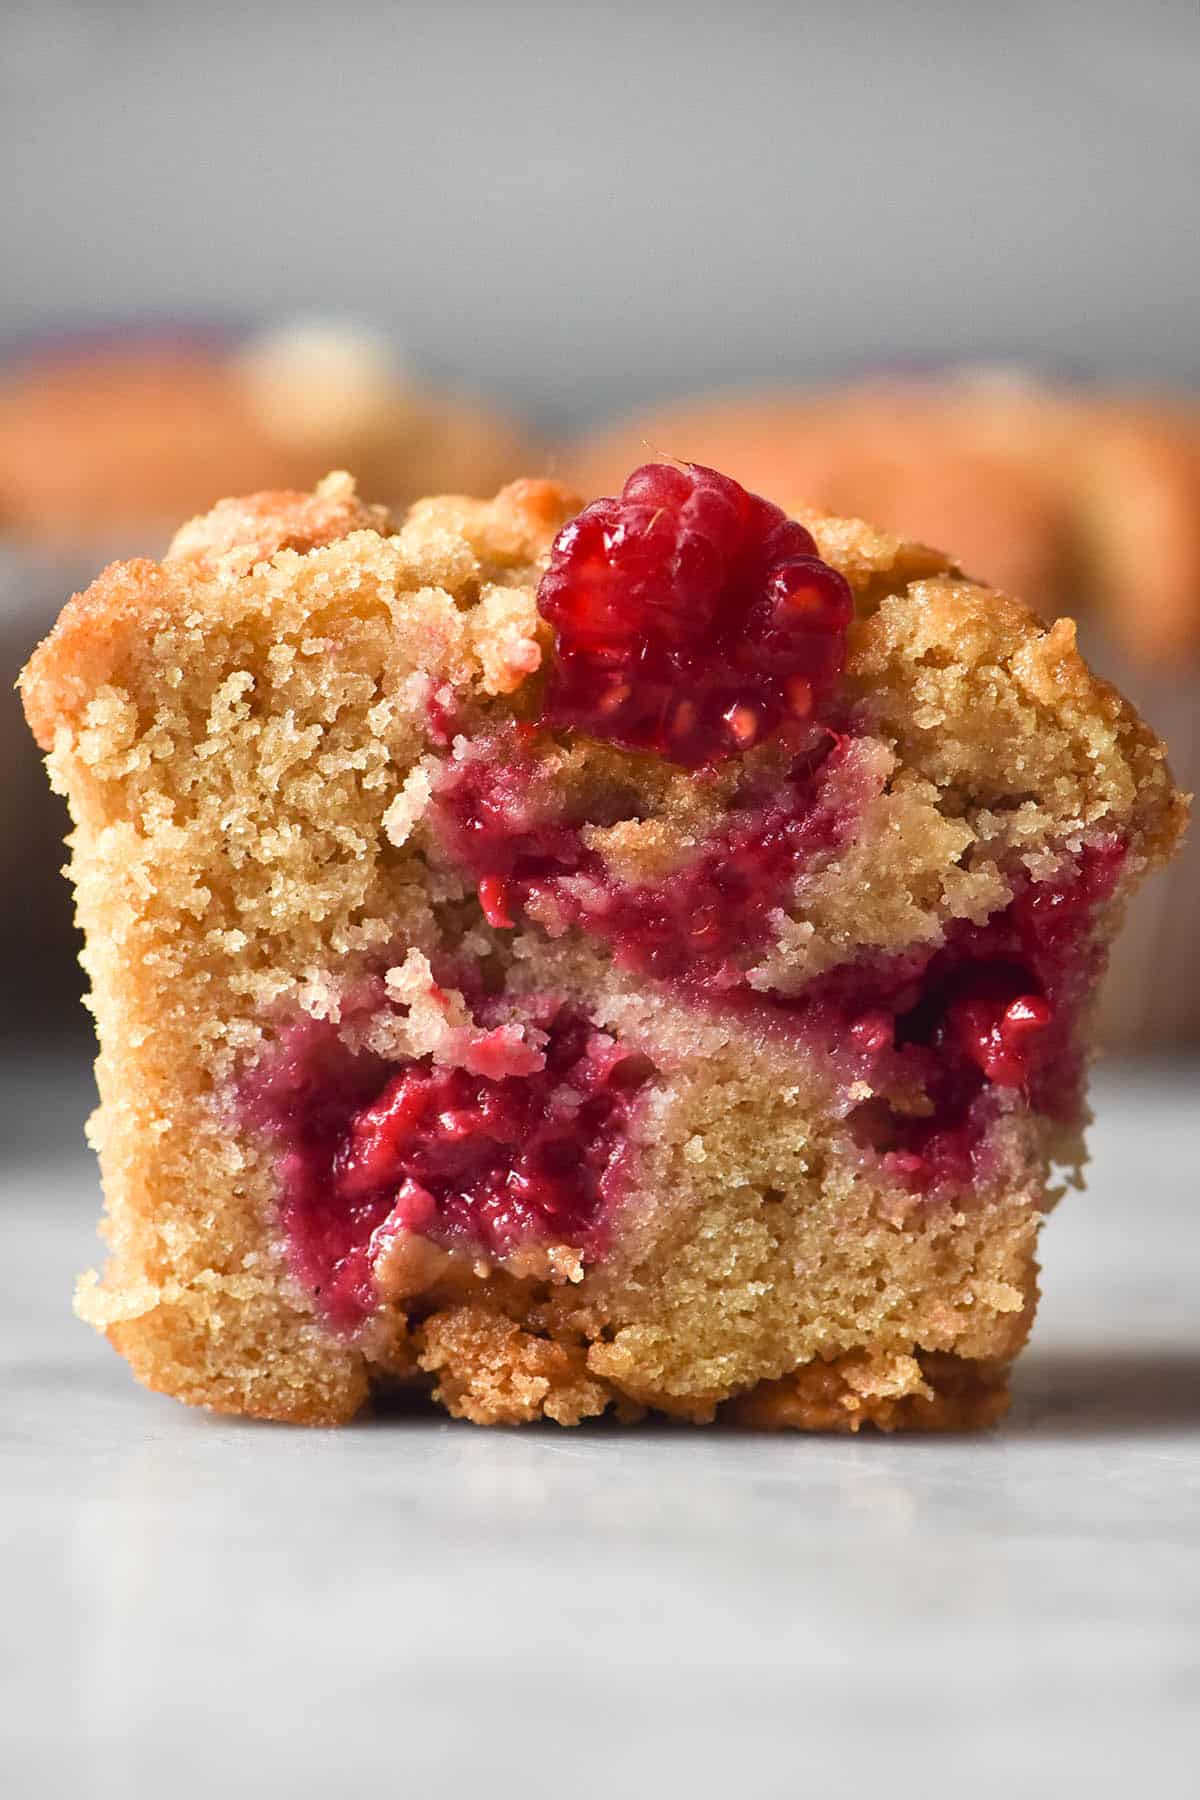 An side on macro image of a gluten free muffin that has been sliced in half, revealing the raspberries and white chocolate inside the light and fluffy muffin